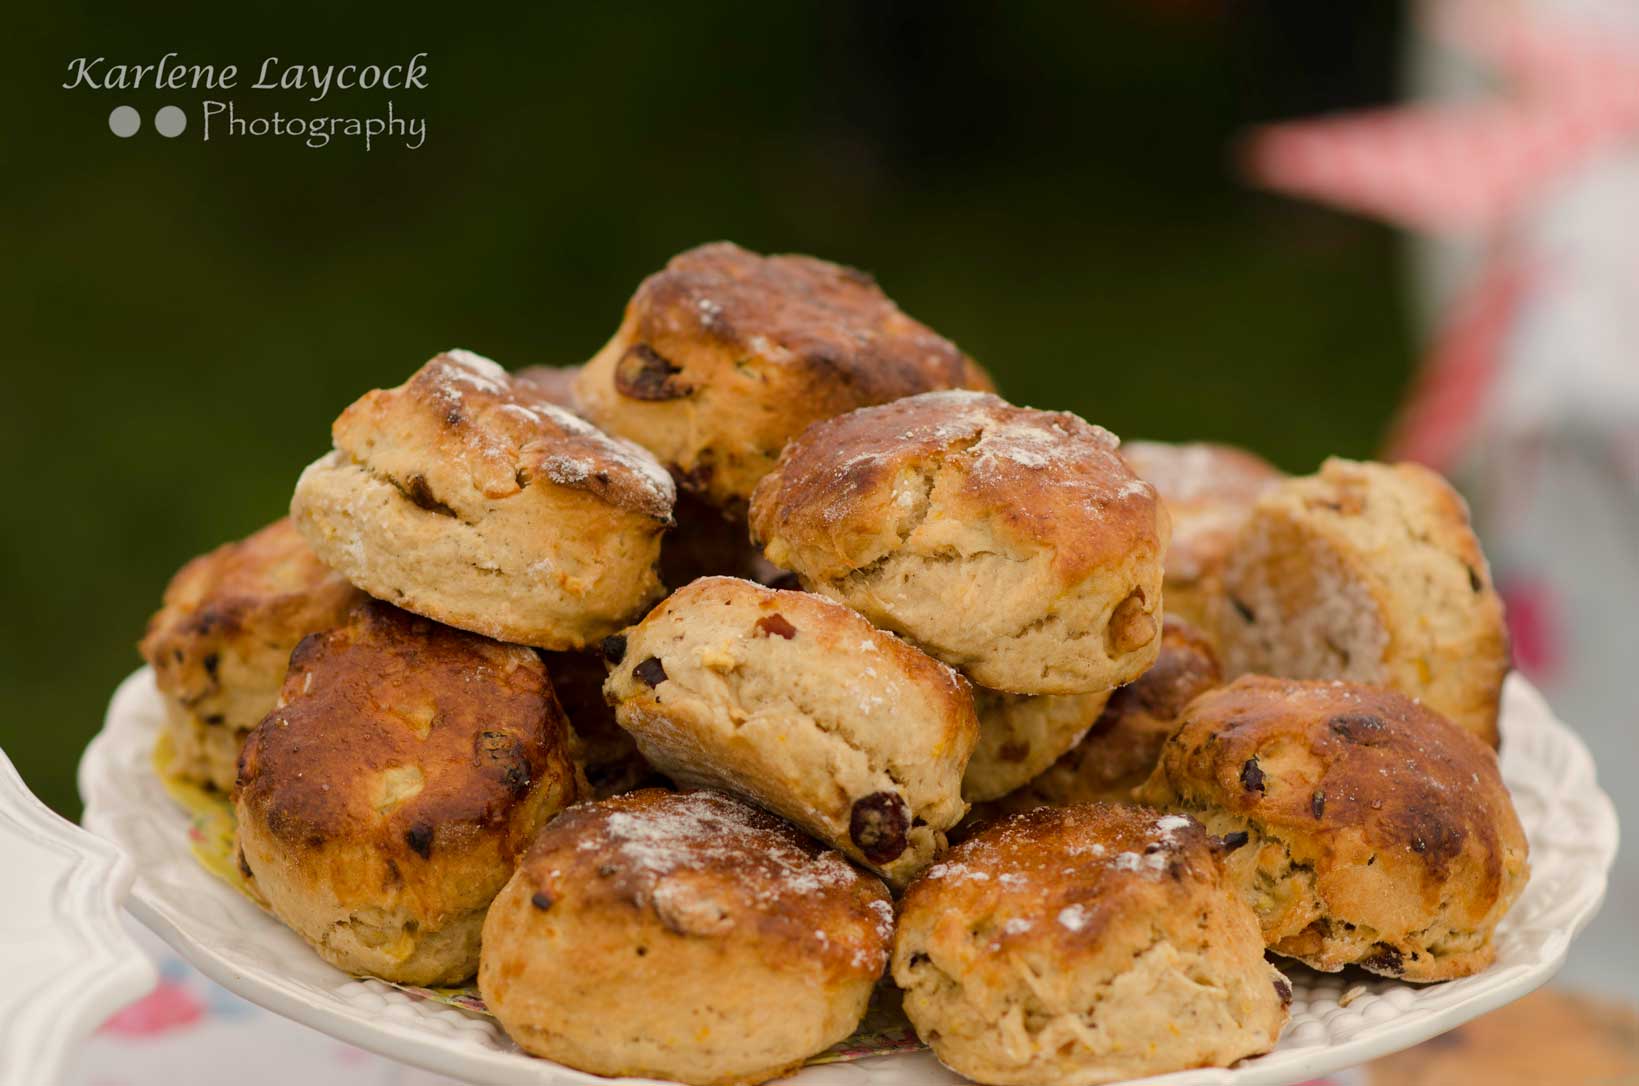 Image of a Plate of Scones taken at a Local Bake Off Event